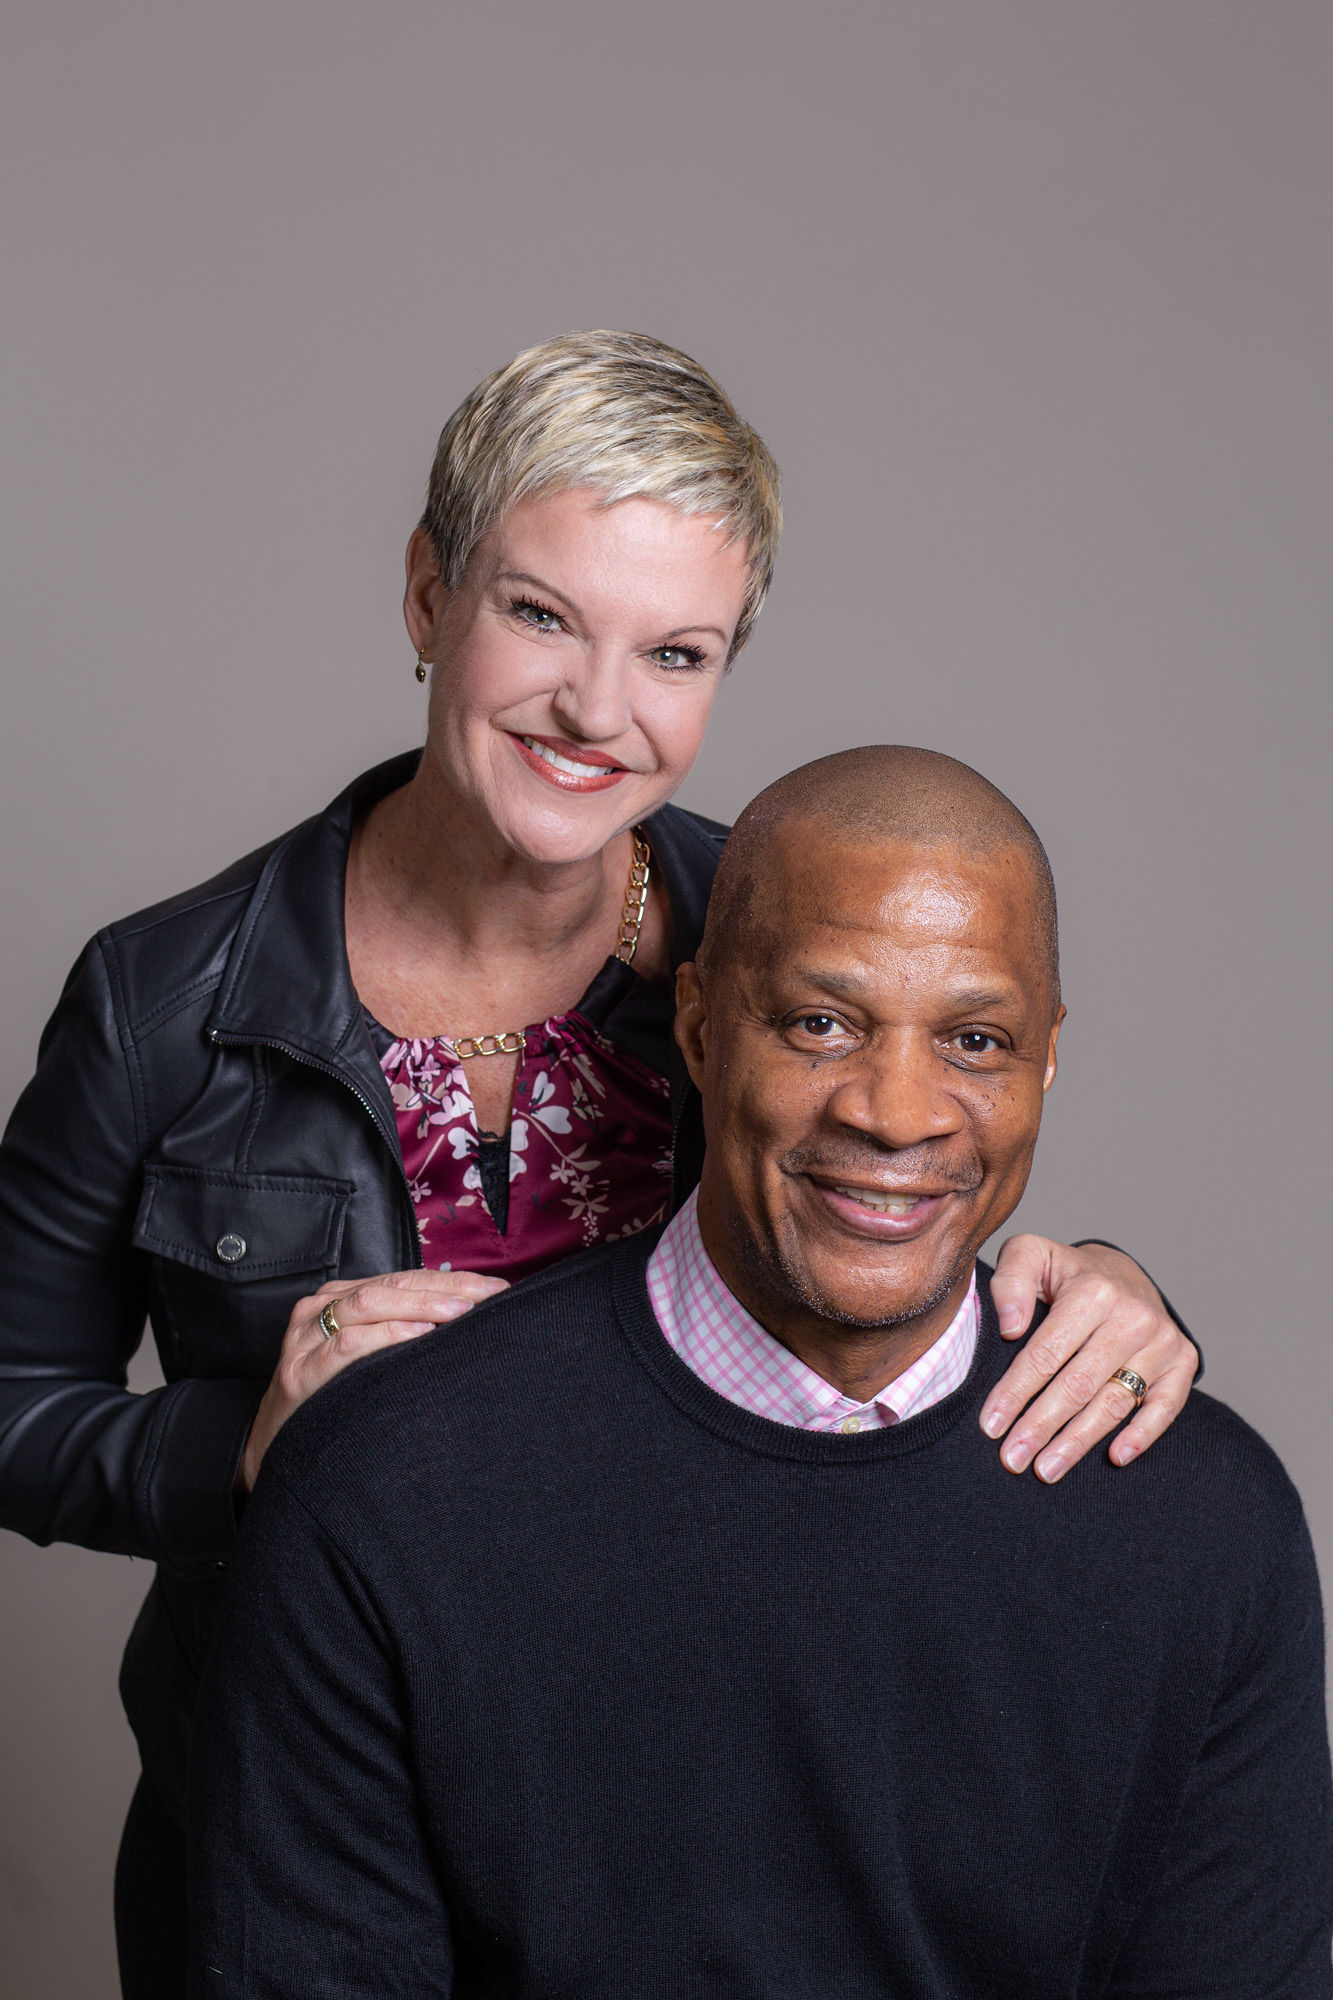 Darryl Strawberry tells about his changed life